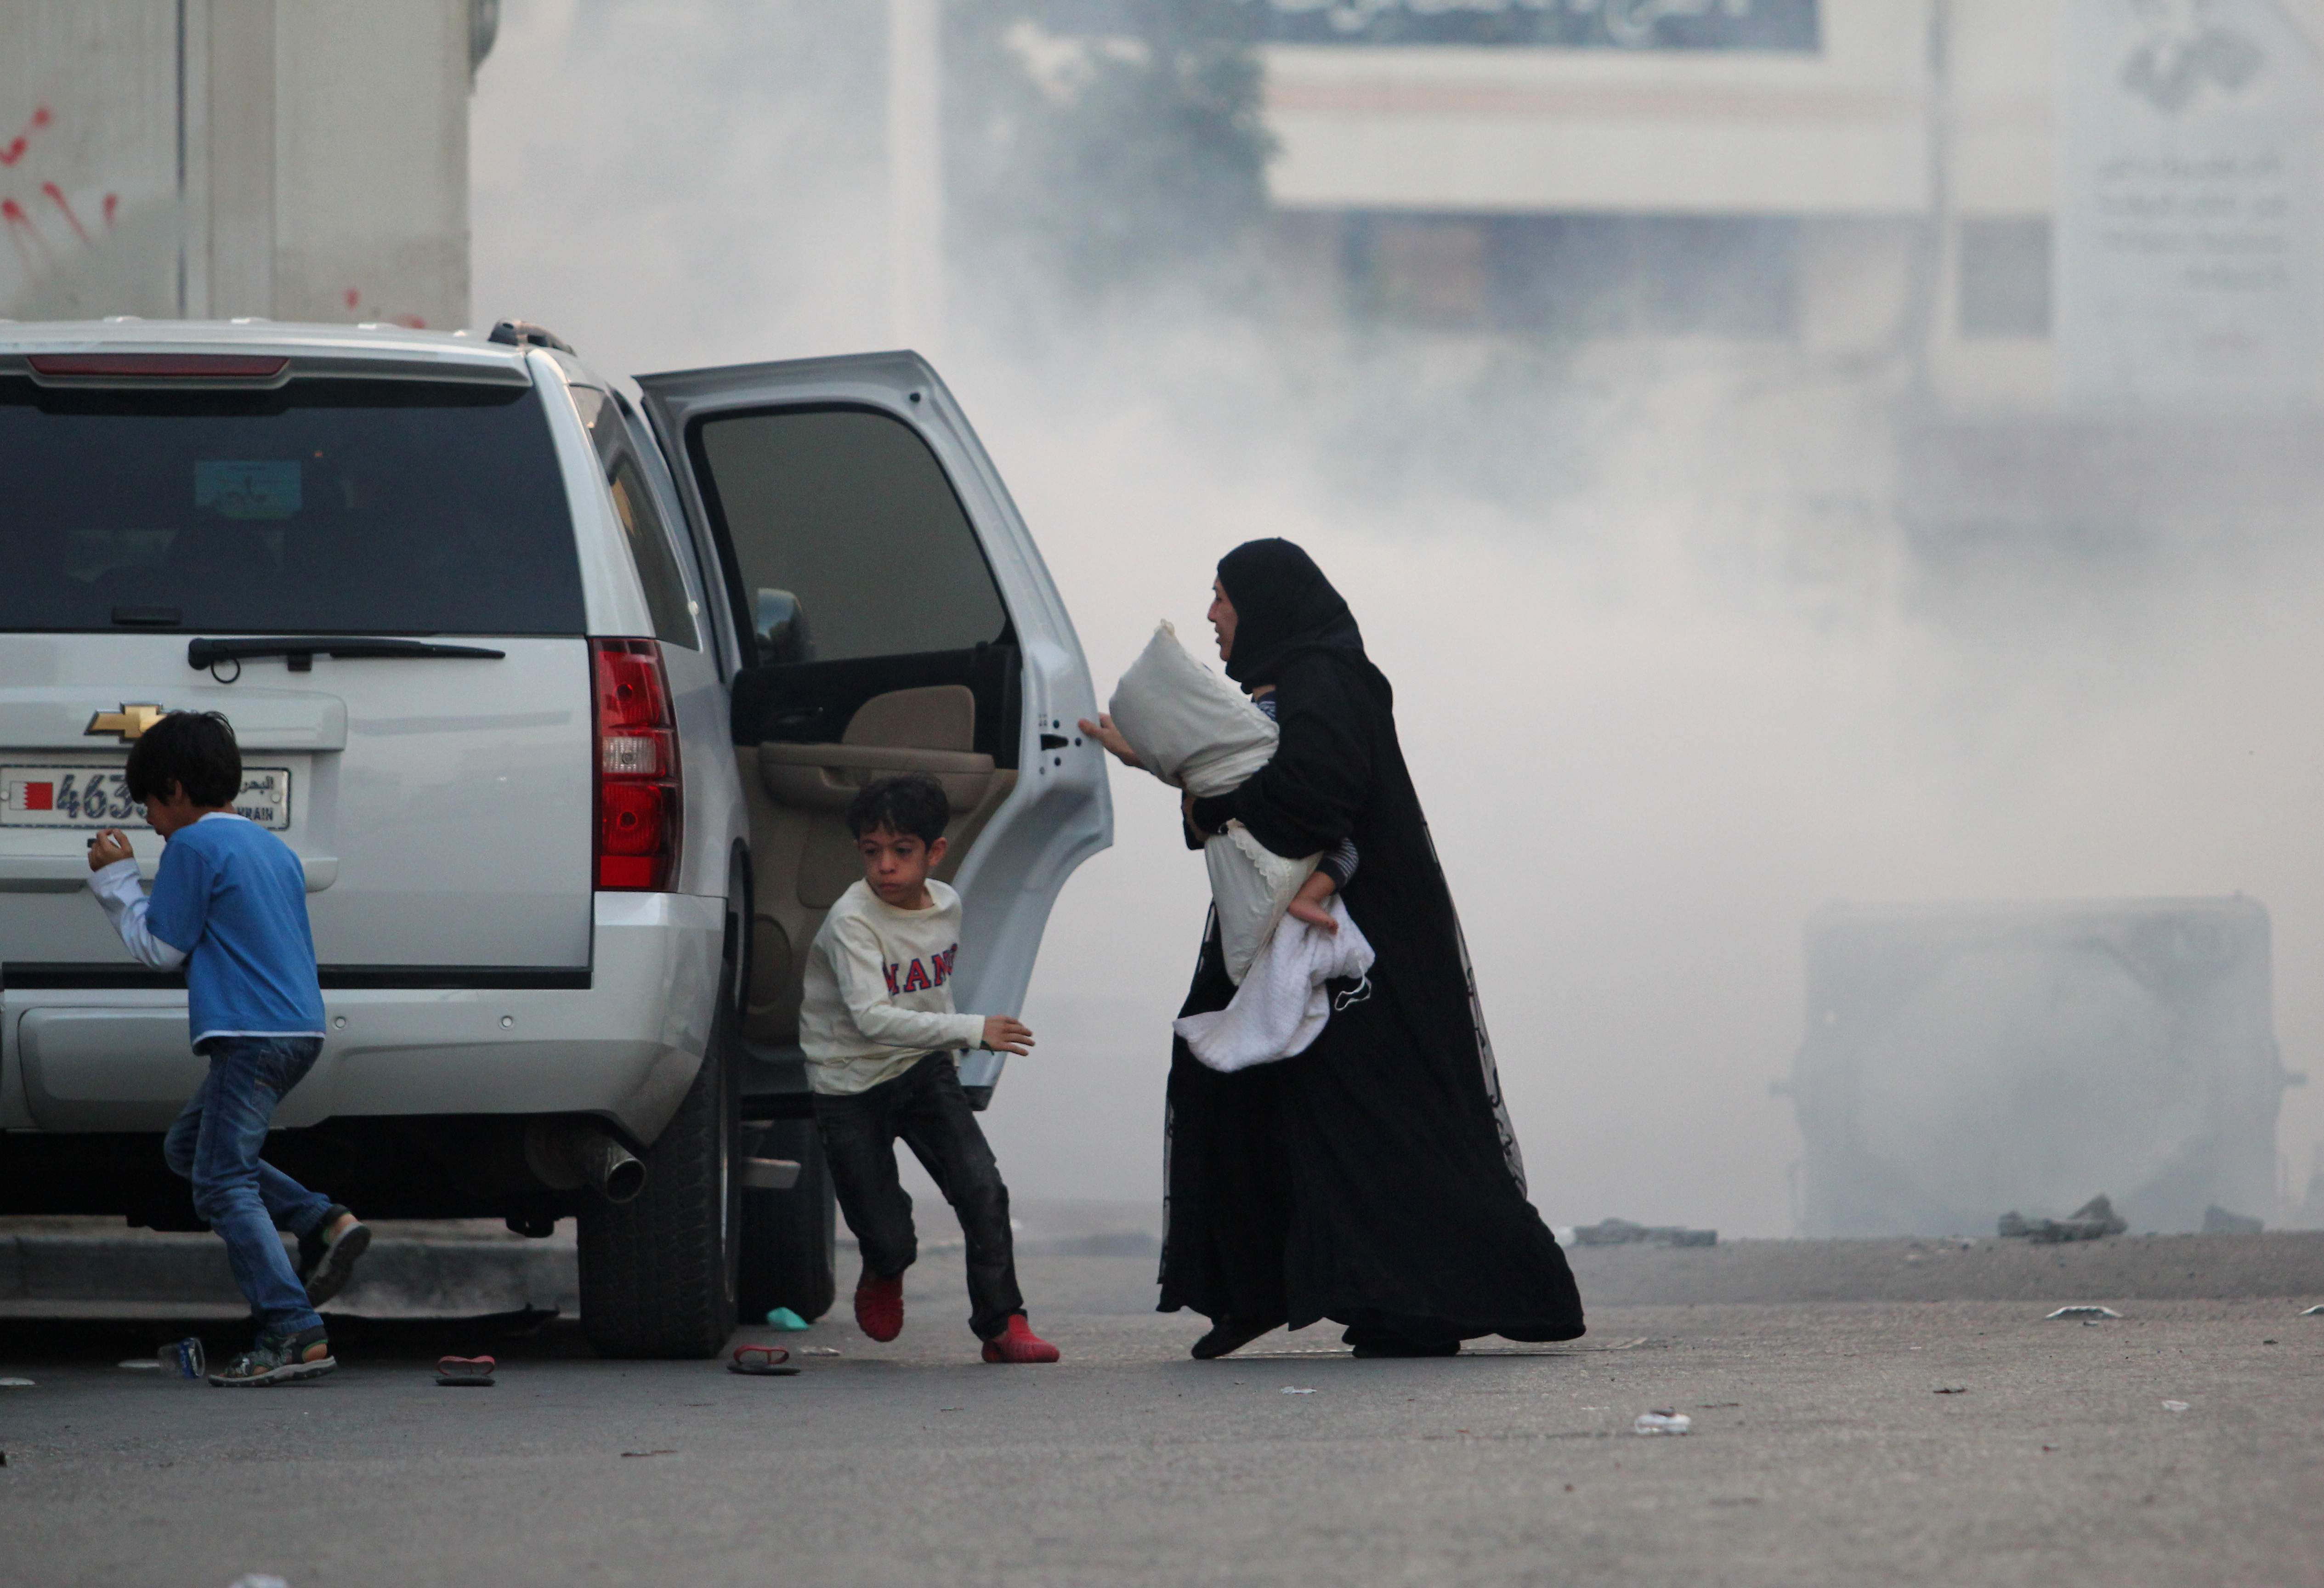 Manama, Bahrain. 2nd January 2015 -- Baby girl surrounded by tear gas, with her mother and her siblings heading to their car during the clashes. -- Violent clashes between protesters and police troops continue in Bahrain, after Sheikh Ali Salman was arrested. Opposition protesters call for his immediate release. Photograph by Sayed Baqer Al Kamel. Copyright: Demotix